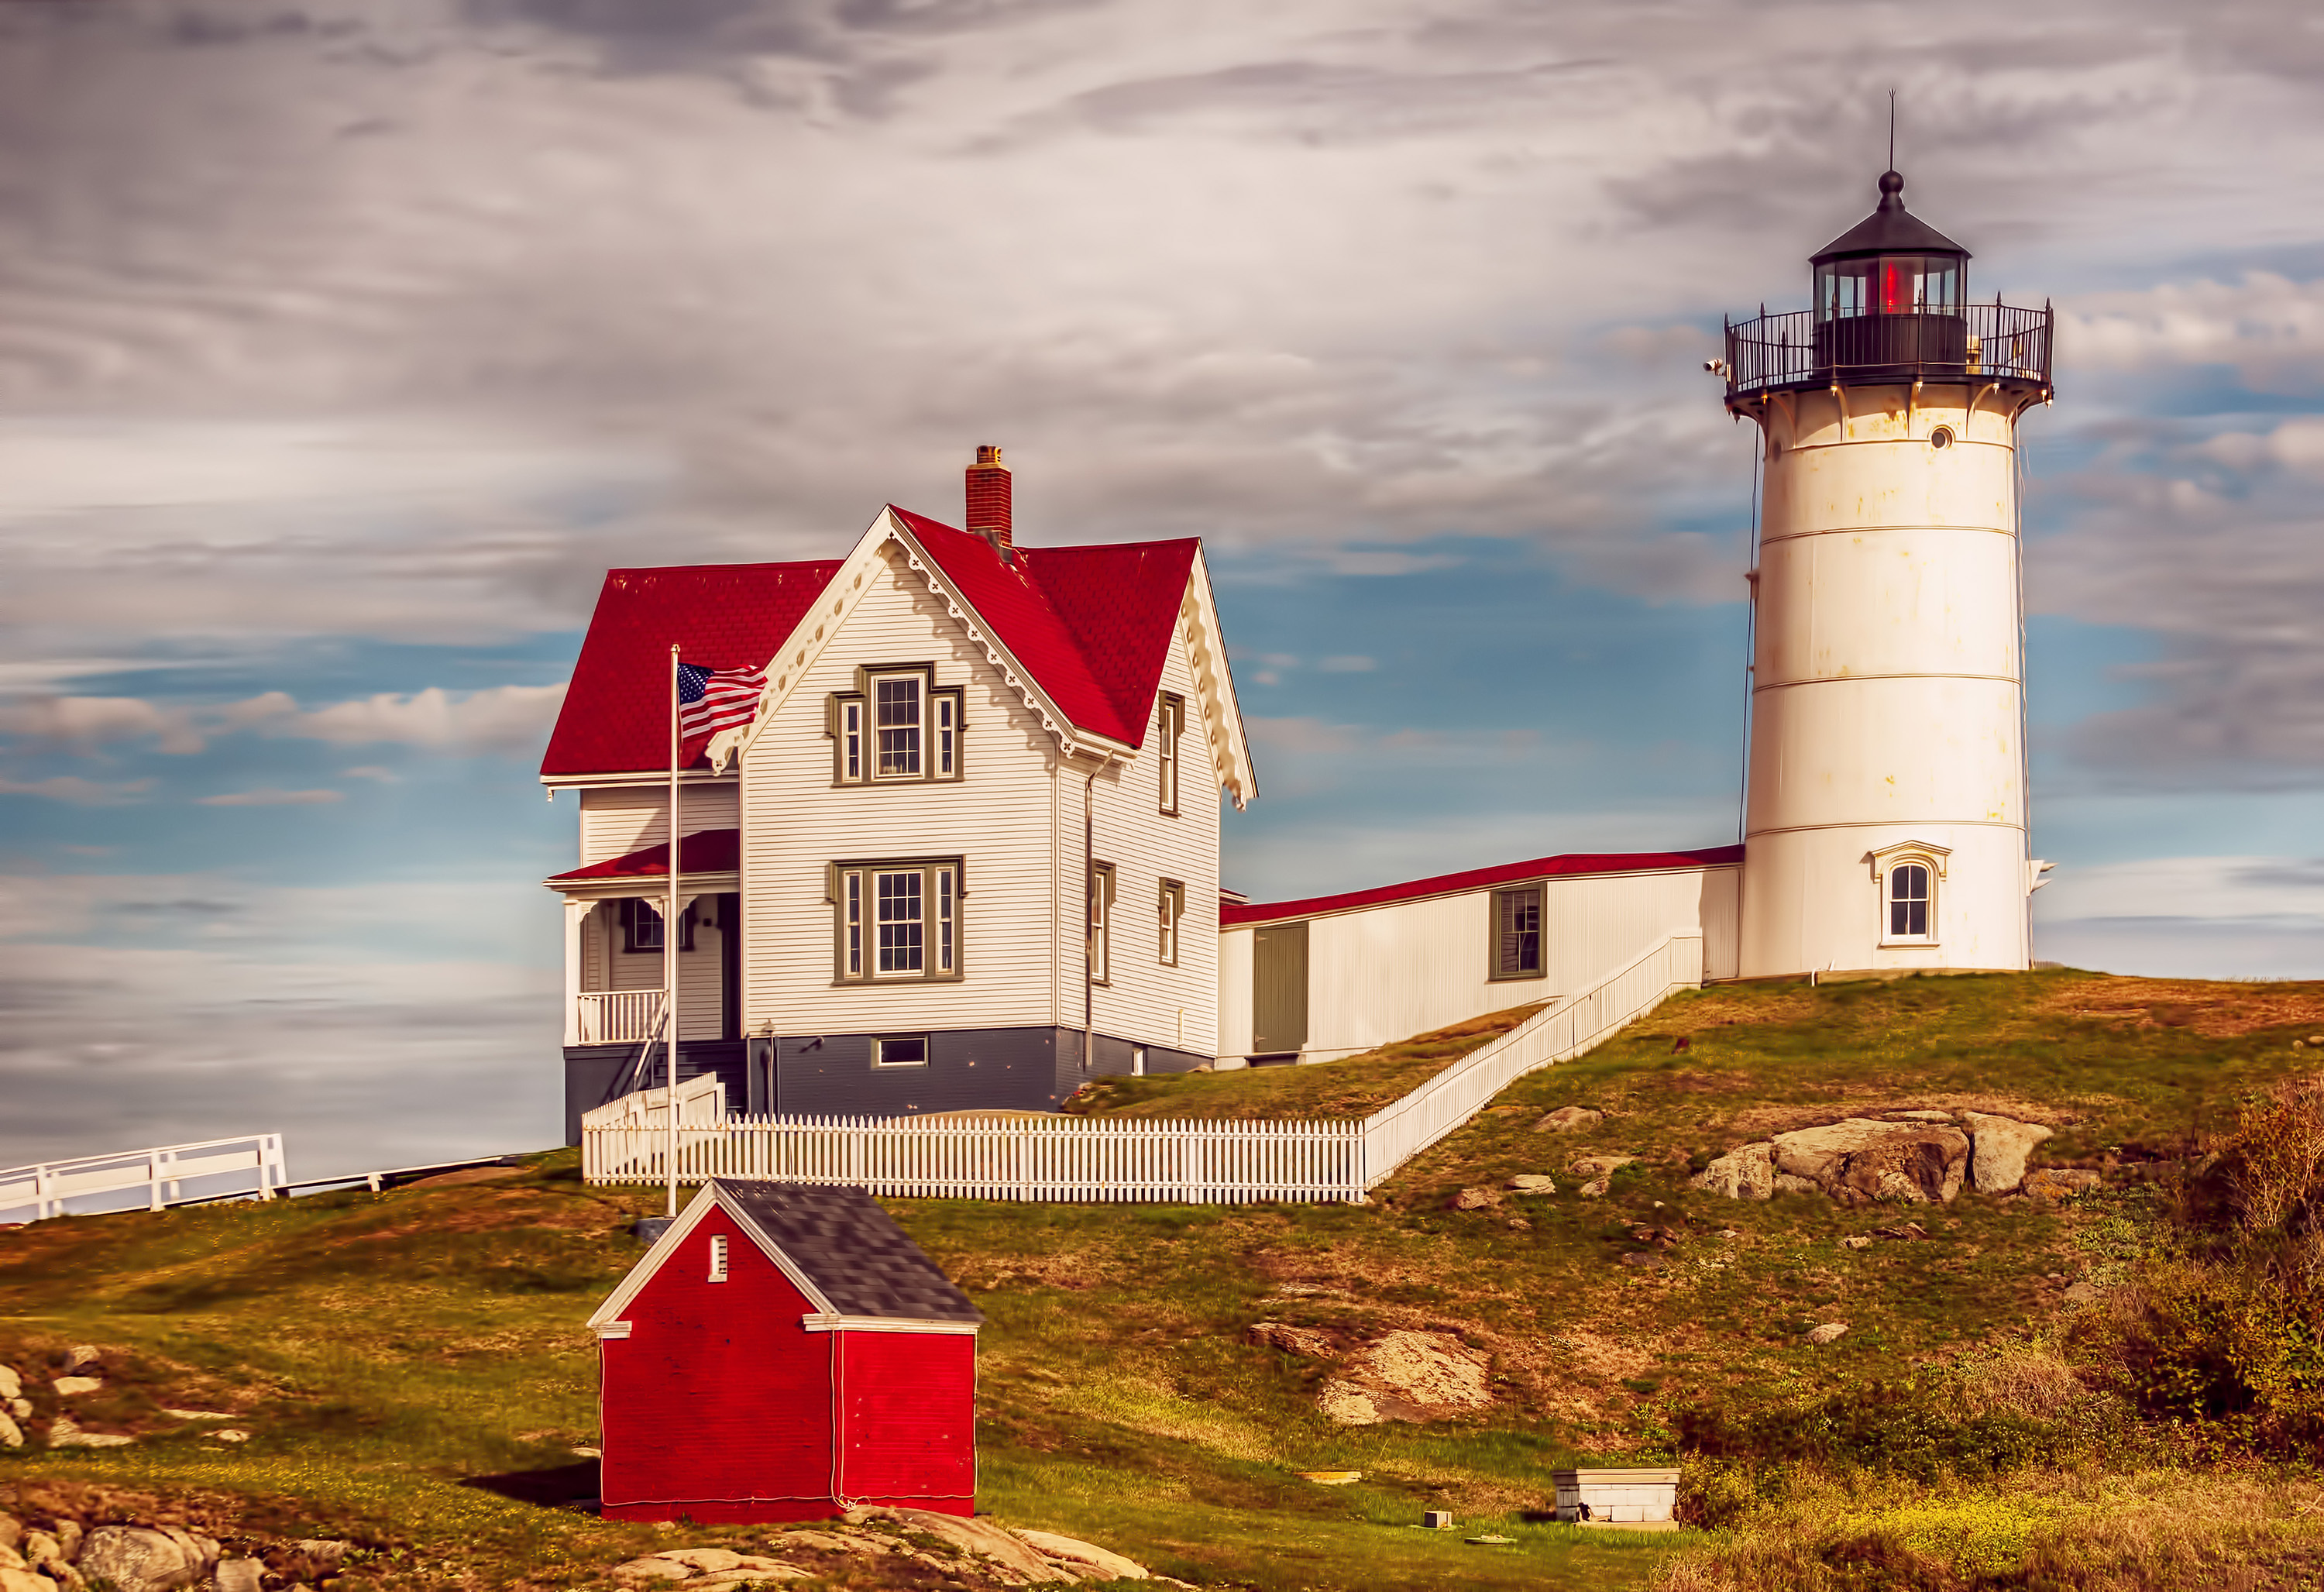 Nubble Lighthouse - New England Today